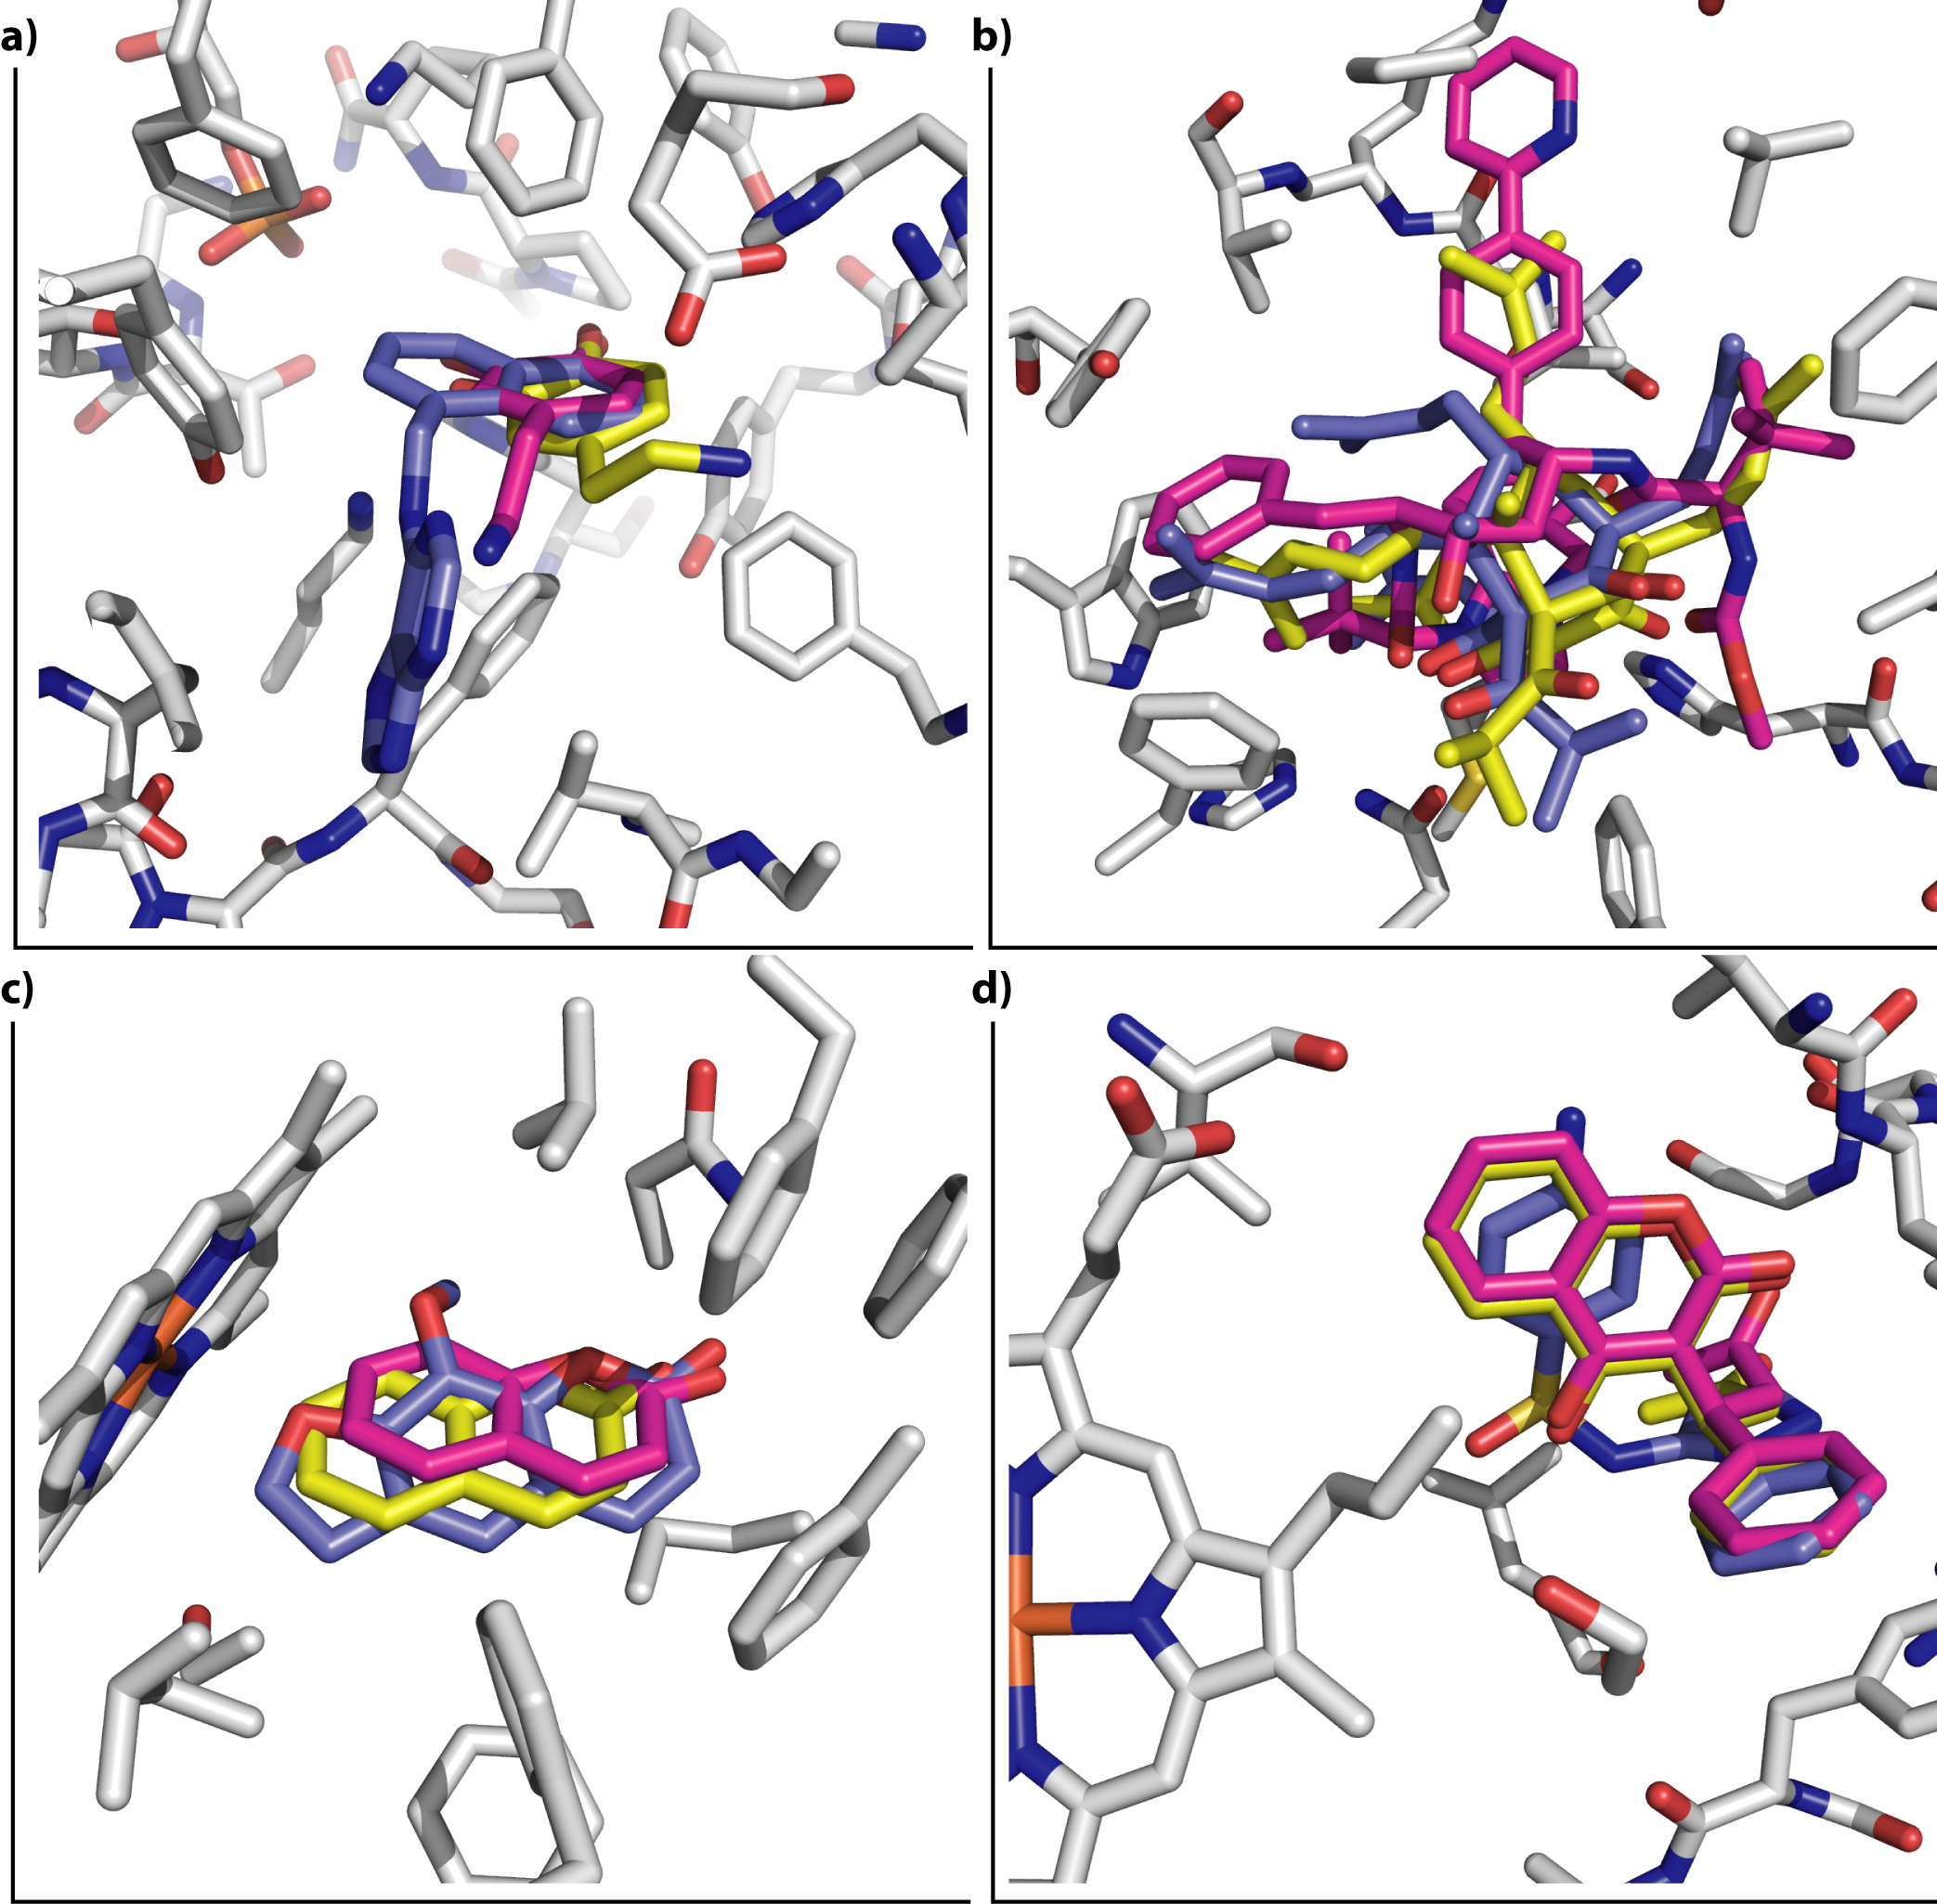 A.T. Garcia-Sosa, S. Sild, K. Takkis, U. Maran, Combined Approach using Ligand Efficiency, Cross-Docking, and Anti-Target Hits for Wild-Type and Drug-Resistant Y181C HIV-1 Reverse Transcriptase, Journal of Chemical Information and Modeling, J. Chem. Inf. Model. 2011, Vol. 51, Iss. 10, 2595-2611 docking binding mode x-ray crystal structure sulfotransferase SULT pregnane-x-receptor PXR cytochrome P450 2a6 2c9 3a4 CYP cross-docking cognate ligand inhibitor